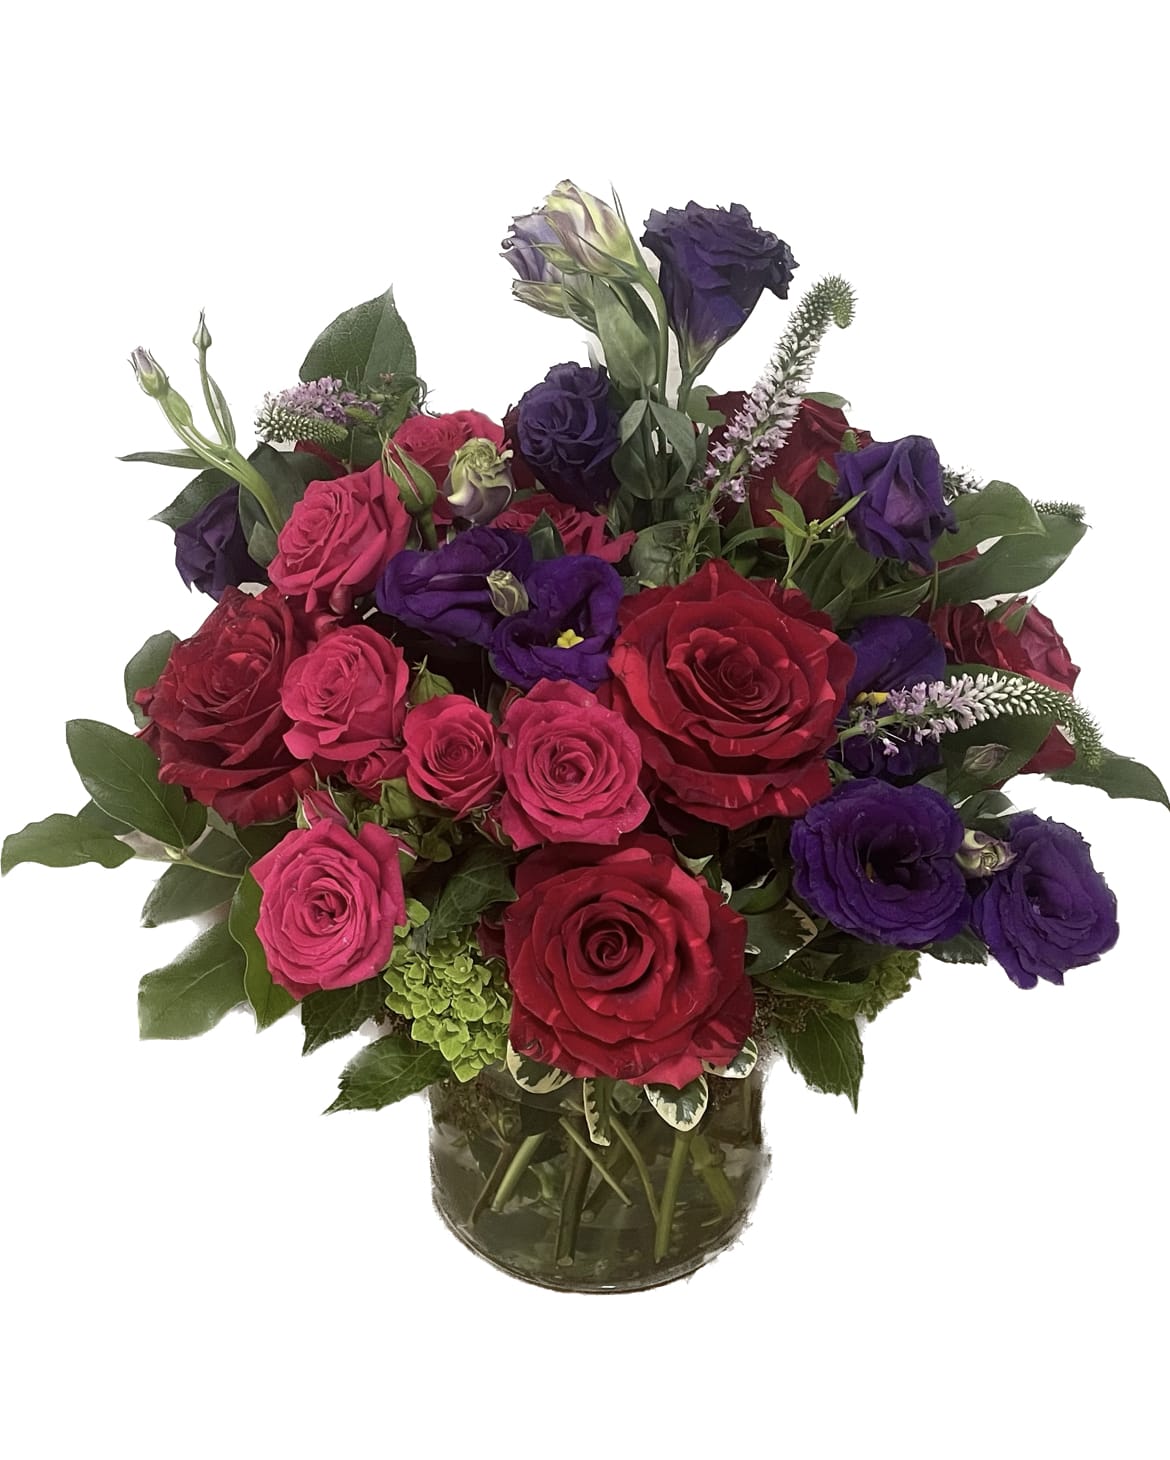 Passion - A gorgeous display of vibrant reds, hot pinks and deep purples. 